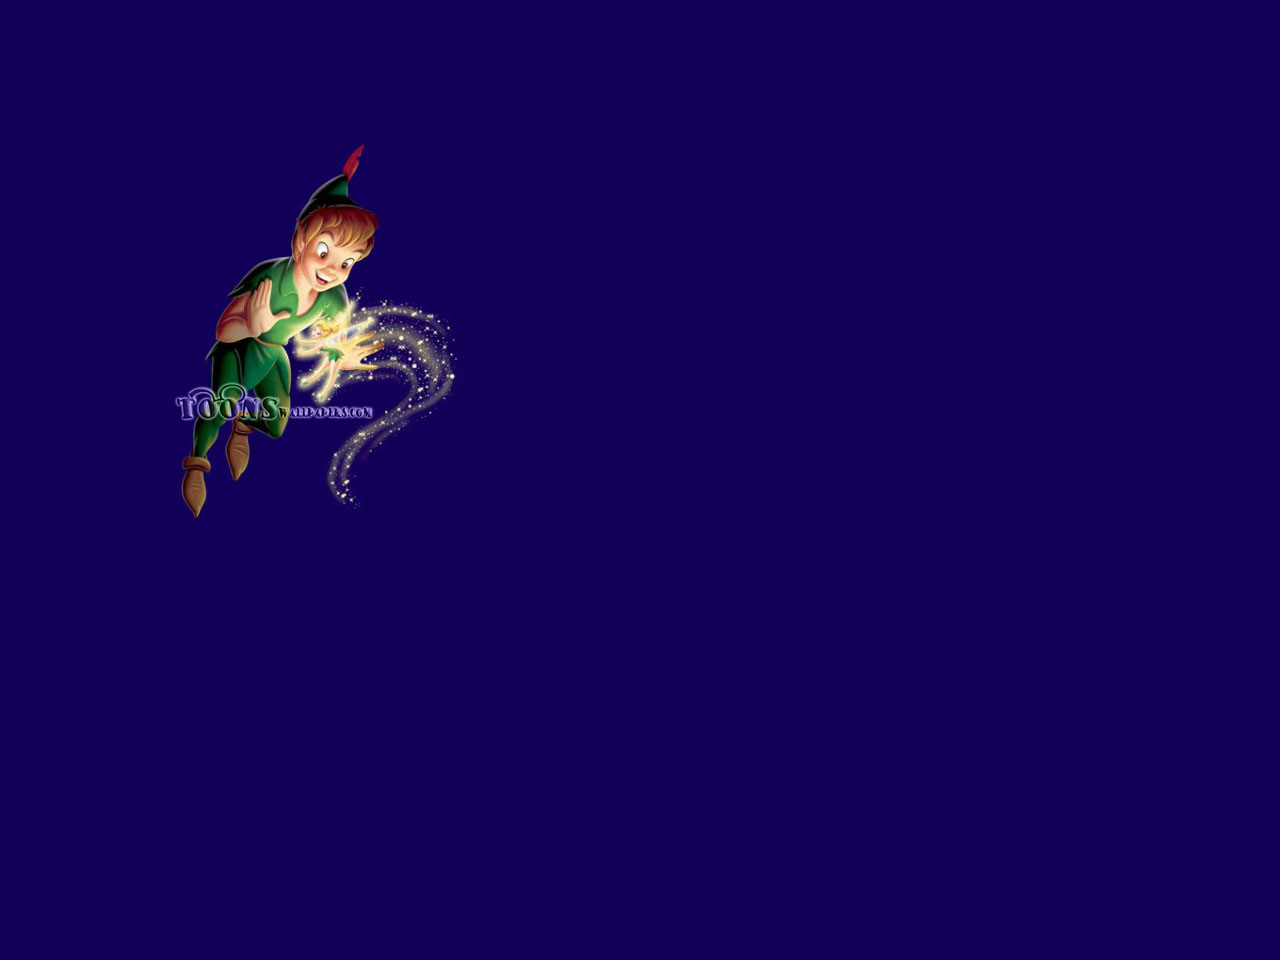 Free download Tinkerbell Wallpaper Below Choose Quotsave Image Asquot And Youaposre [1280x960] for your Desktop, Mobile & Tablet. Explore Peter Pan iPhone Wallpaper. Peter Pan Wallpaper